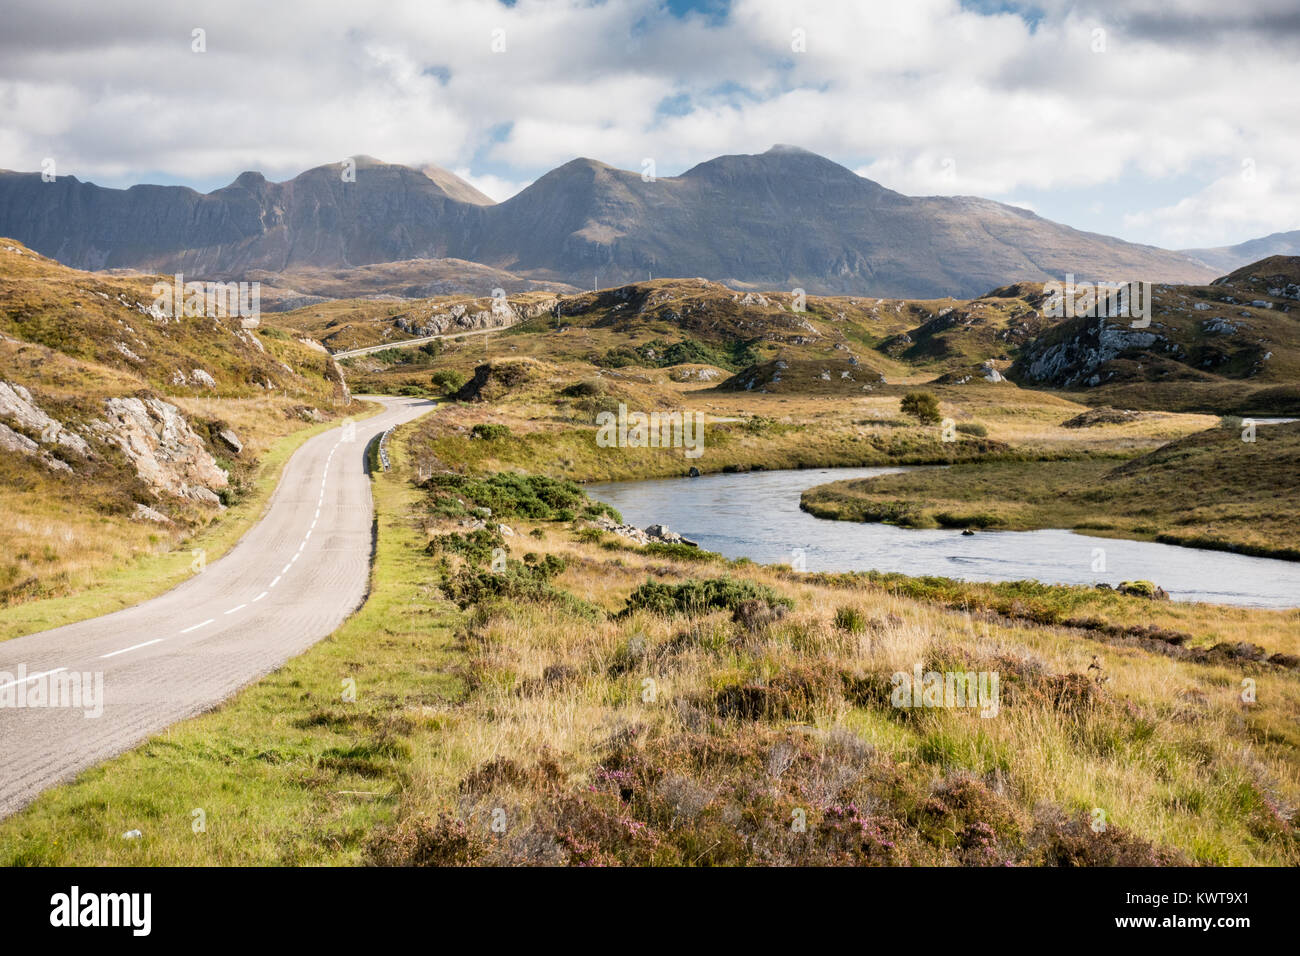 The A837 road, part of the North Coast 500 route, meanders past rivers and low hills in the glacial landscape of Assynt, with Quinag mountain in the d Stock Photo